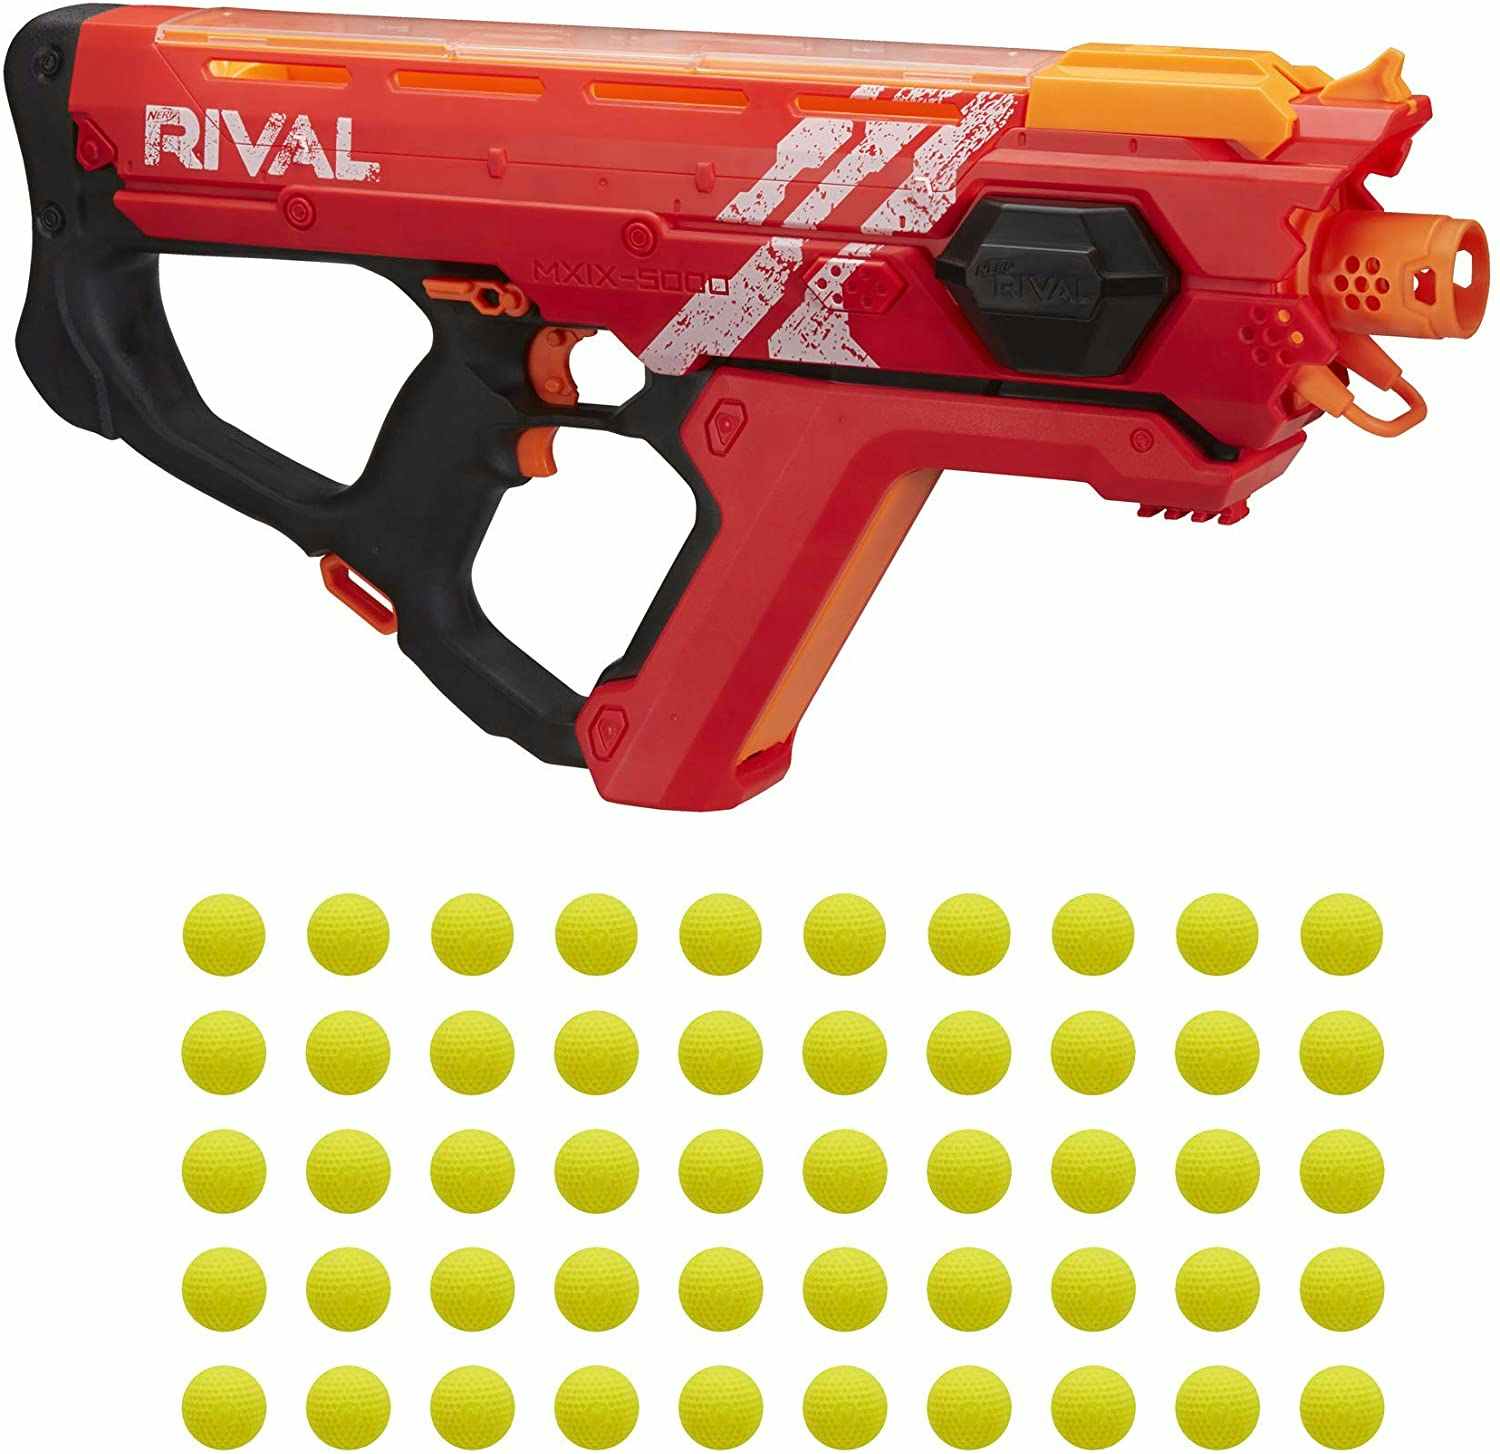 stock image of Nerf Rival 5000 to gun